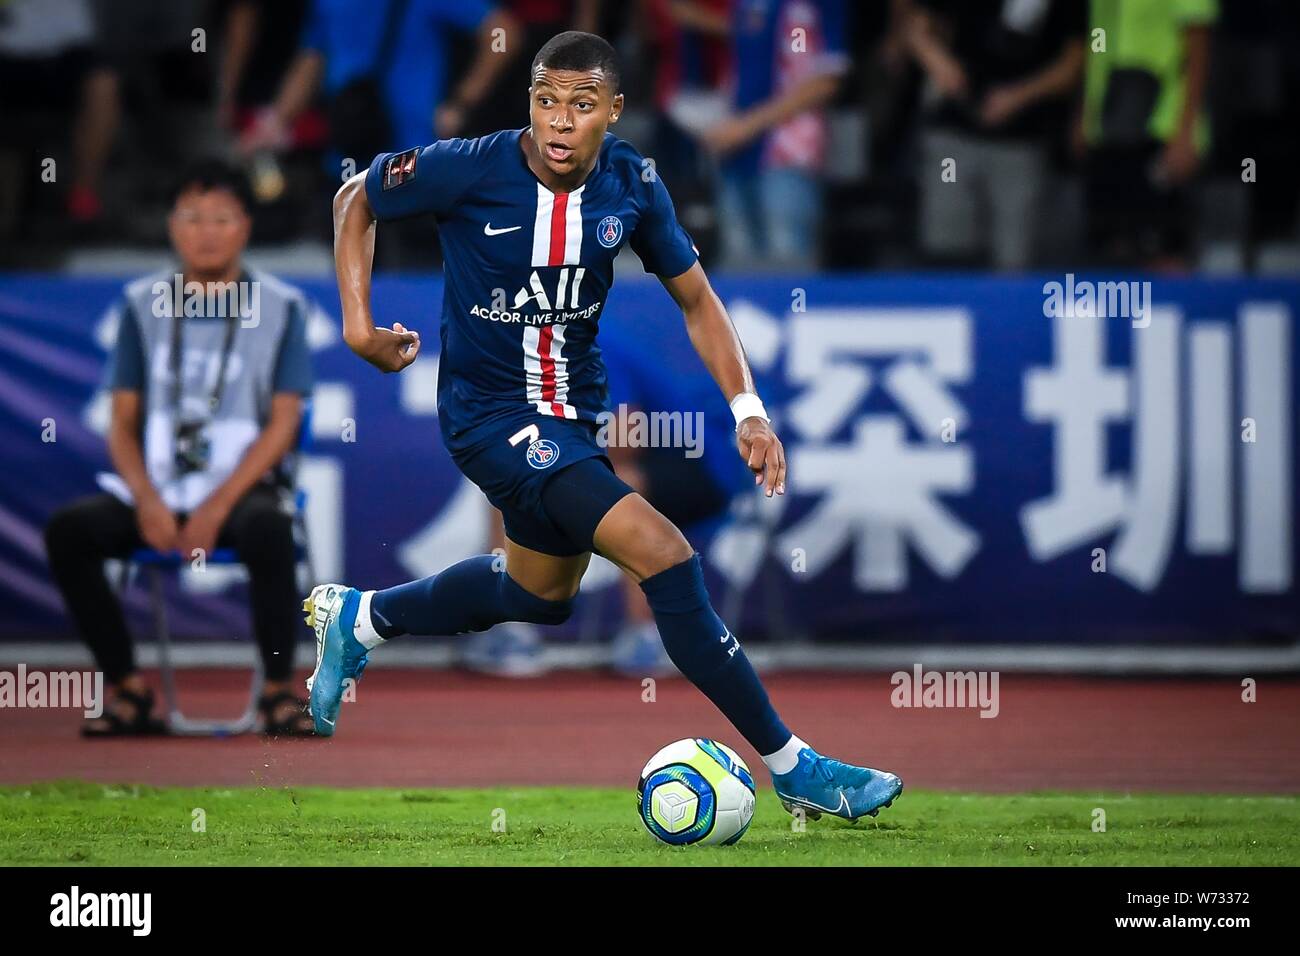 Kylian Mbappe Of Paris Saint Germain Dribbles Against Stade Rennais During The Trophee Des Champions Champion S Trophy Match In Shenzhen City South China S Guangdong Province 3 August 2019 Stock Photo Alamy